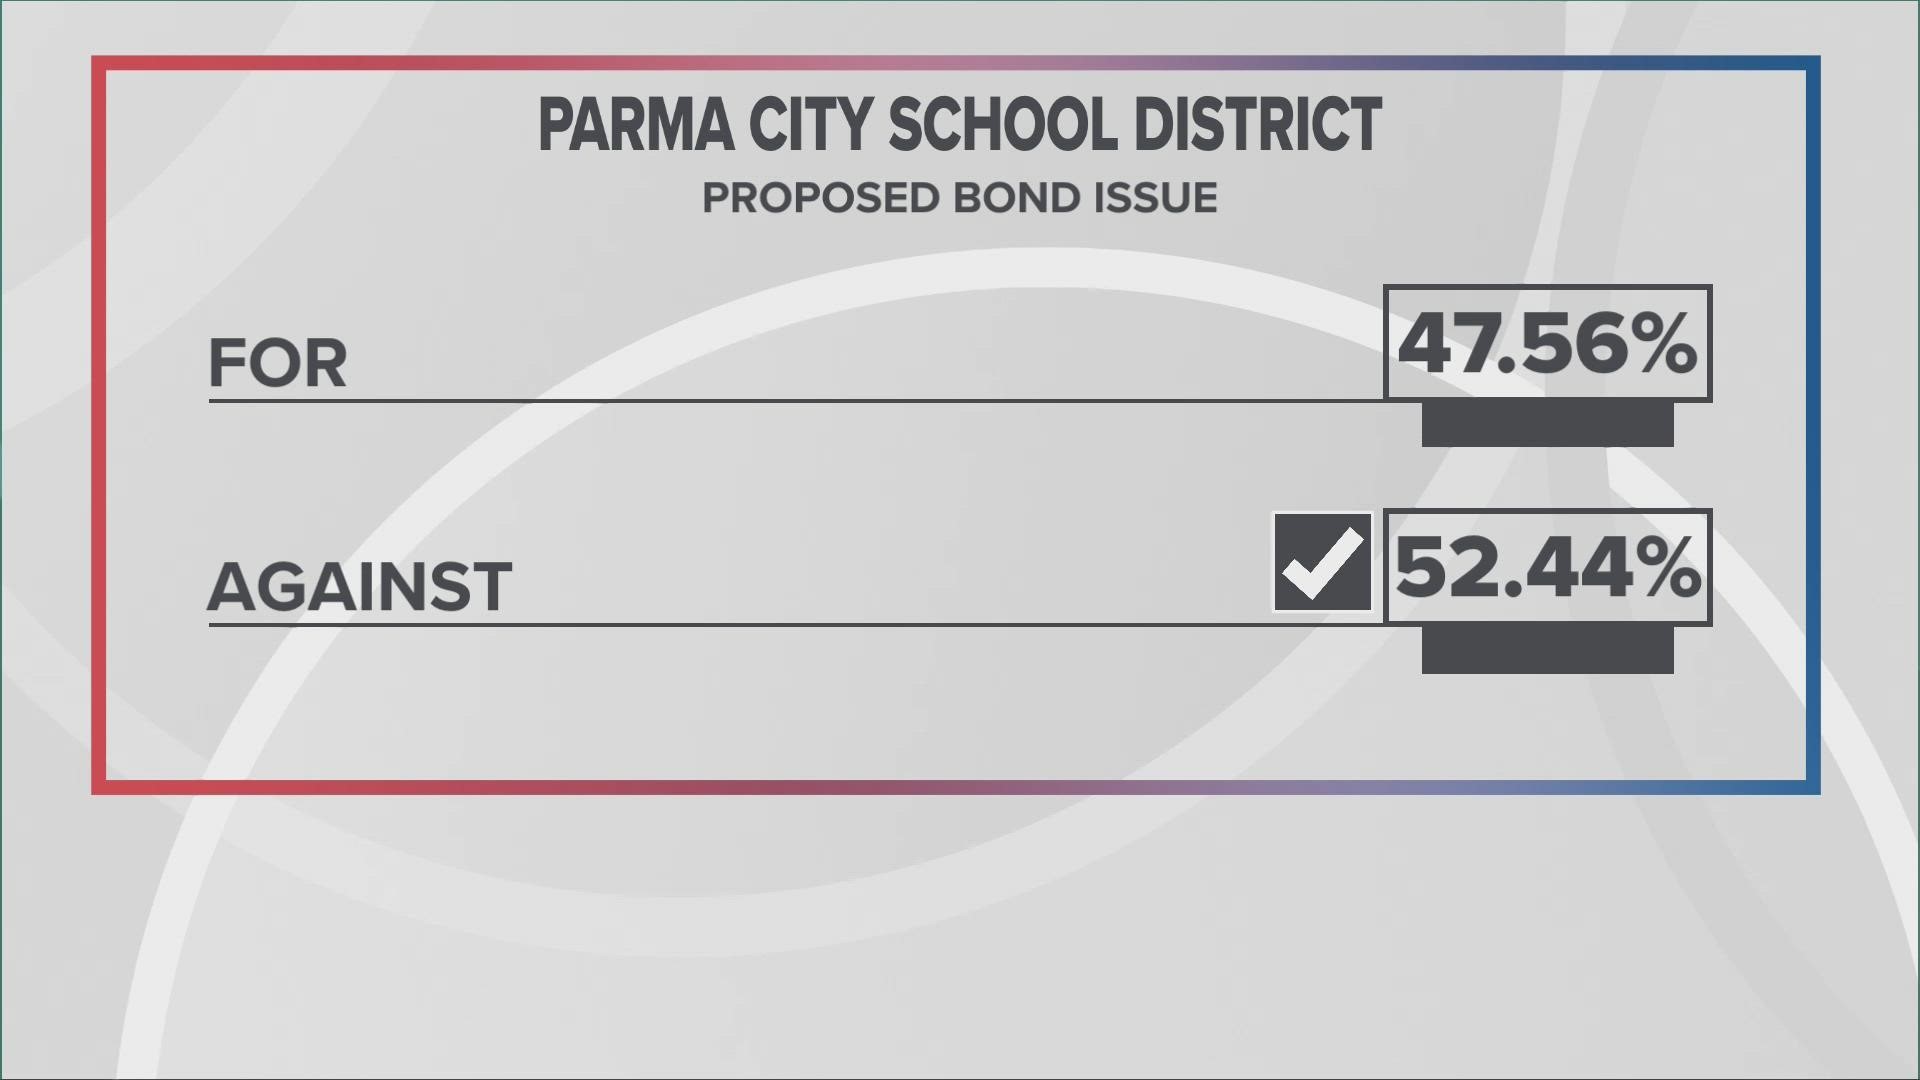 Some of the school districts with levies and bonds on the ballot included Parma City School District and Nordonia Hills City School District.